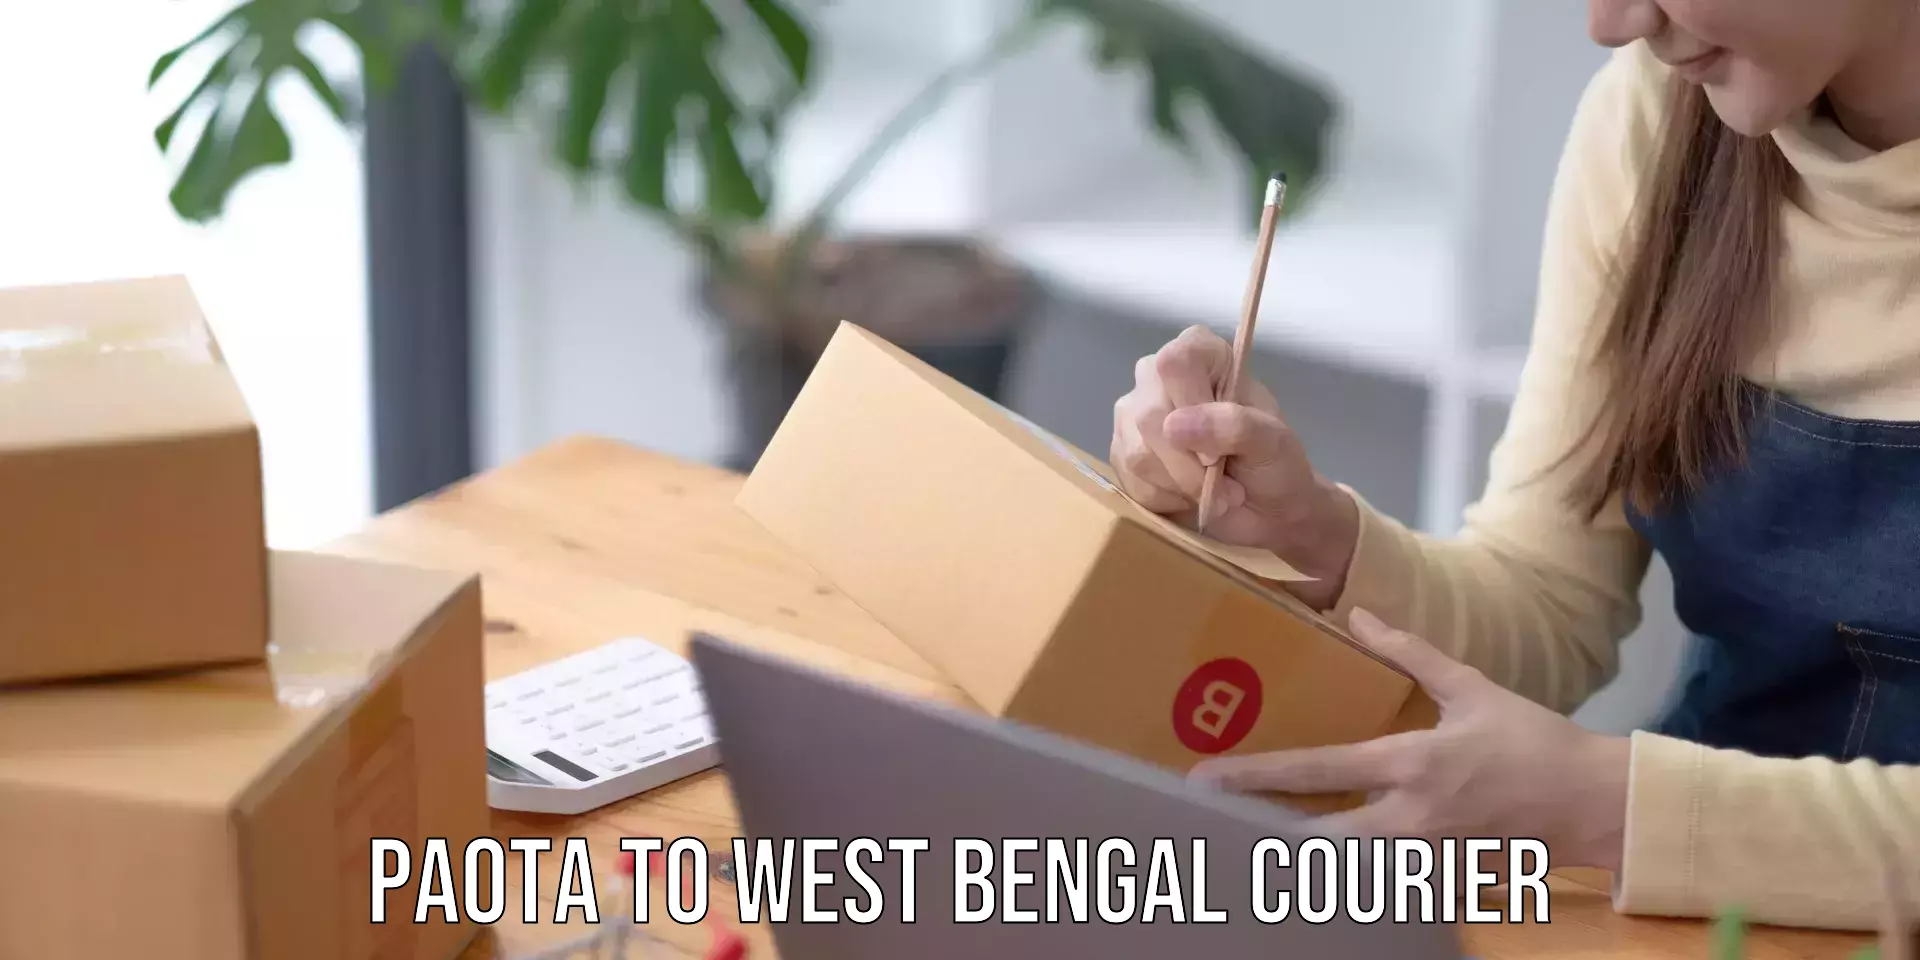 Postal and courier services Paota to West Bengal